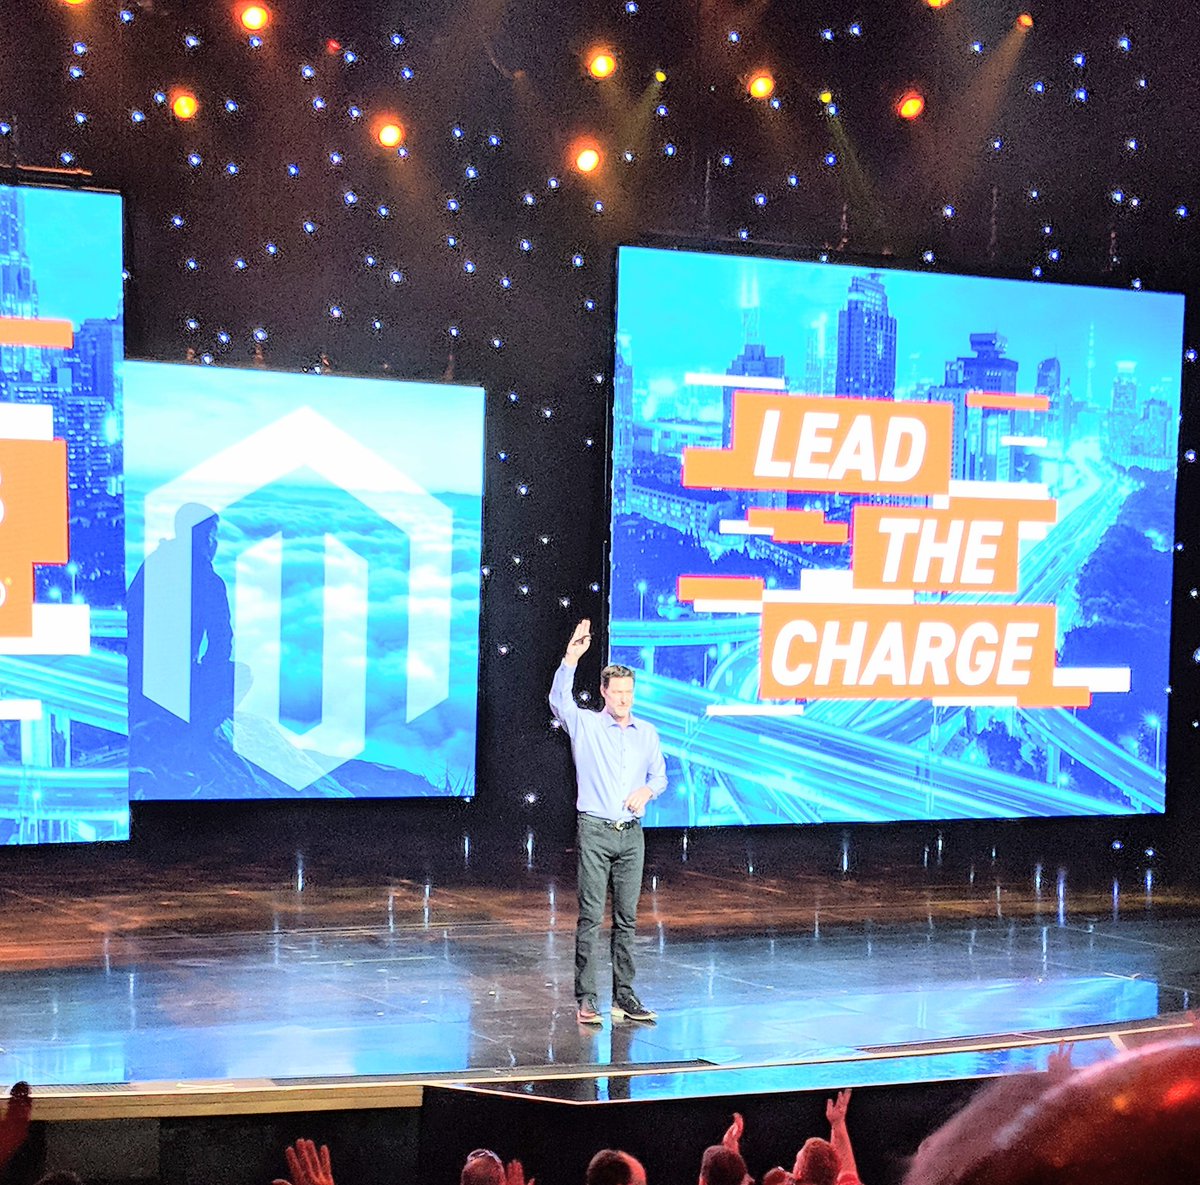 kensium: 'We all lead in different ways....fueled by purpose and inspiration.'n -@mklave1 #MagentoImagine https://t.co/0P80zv9orP